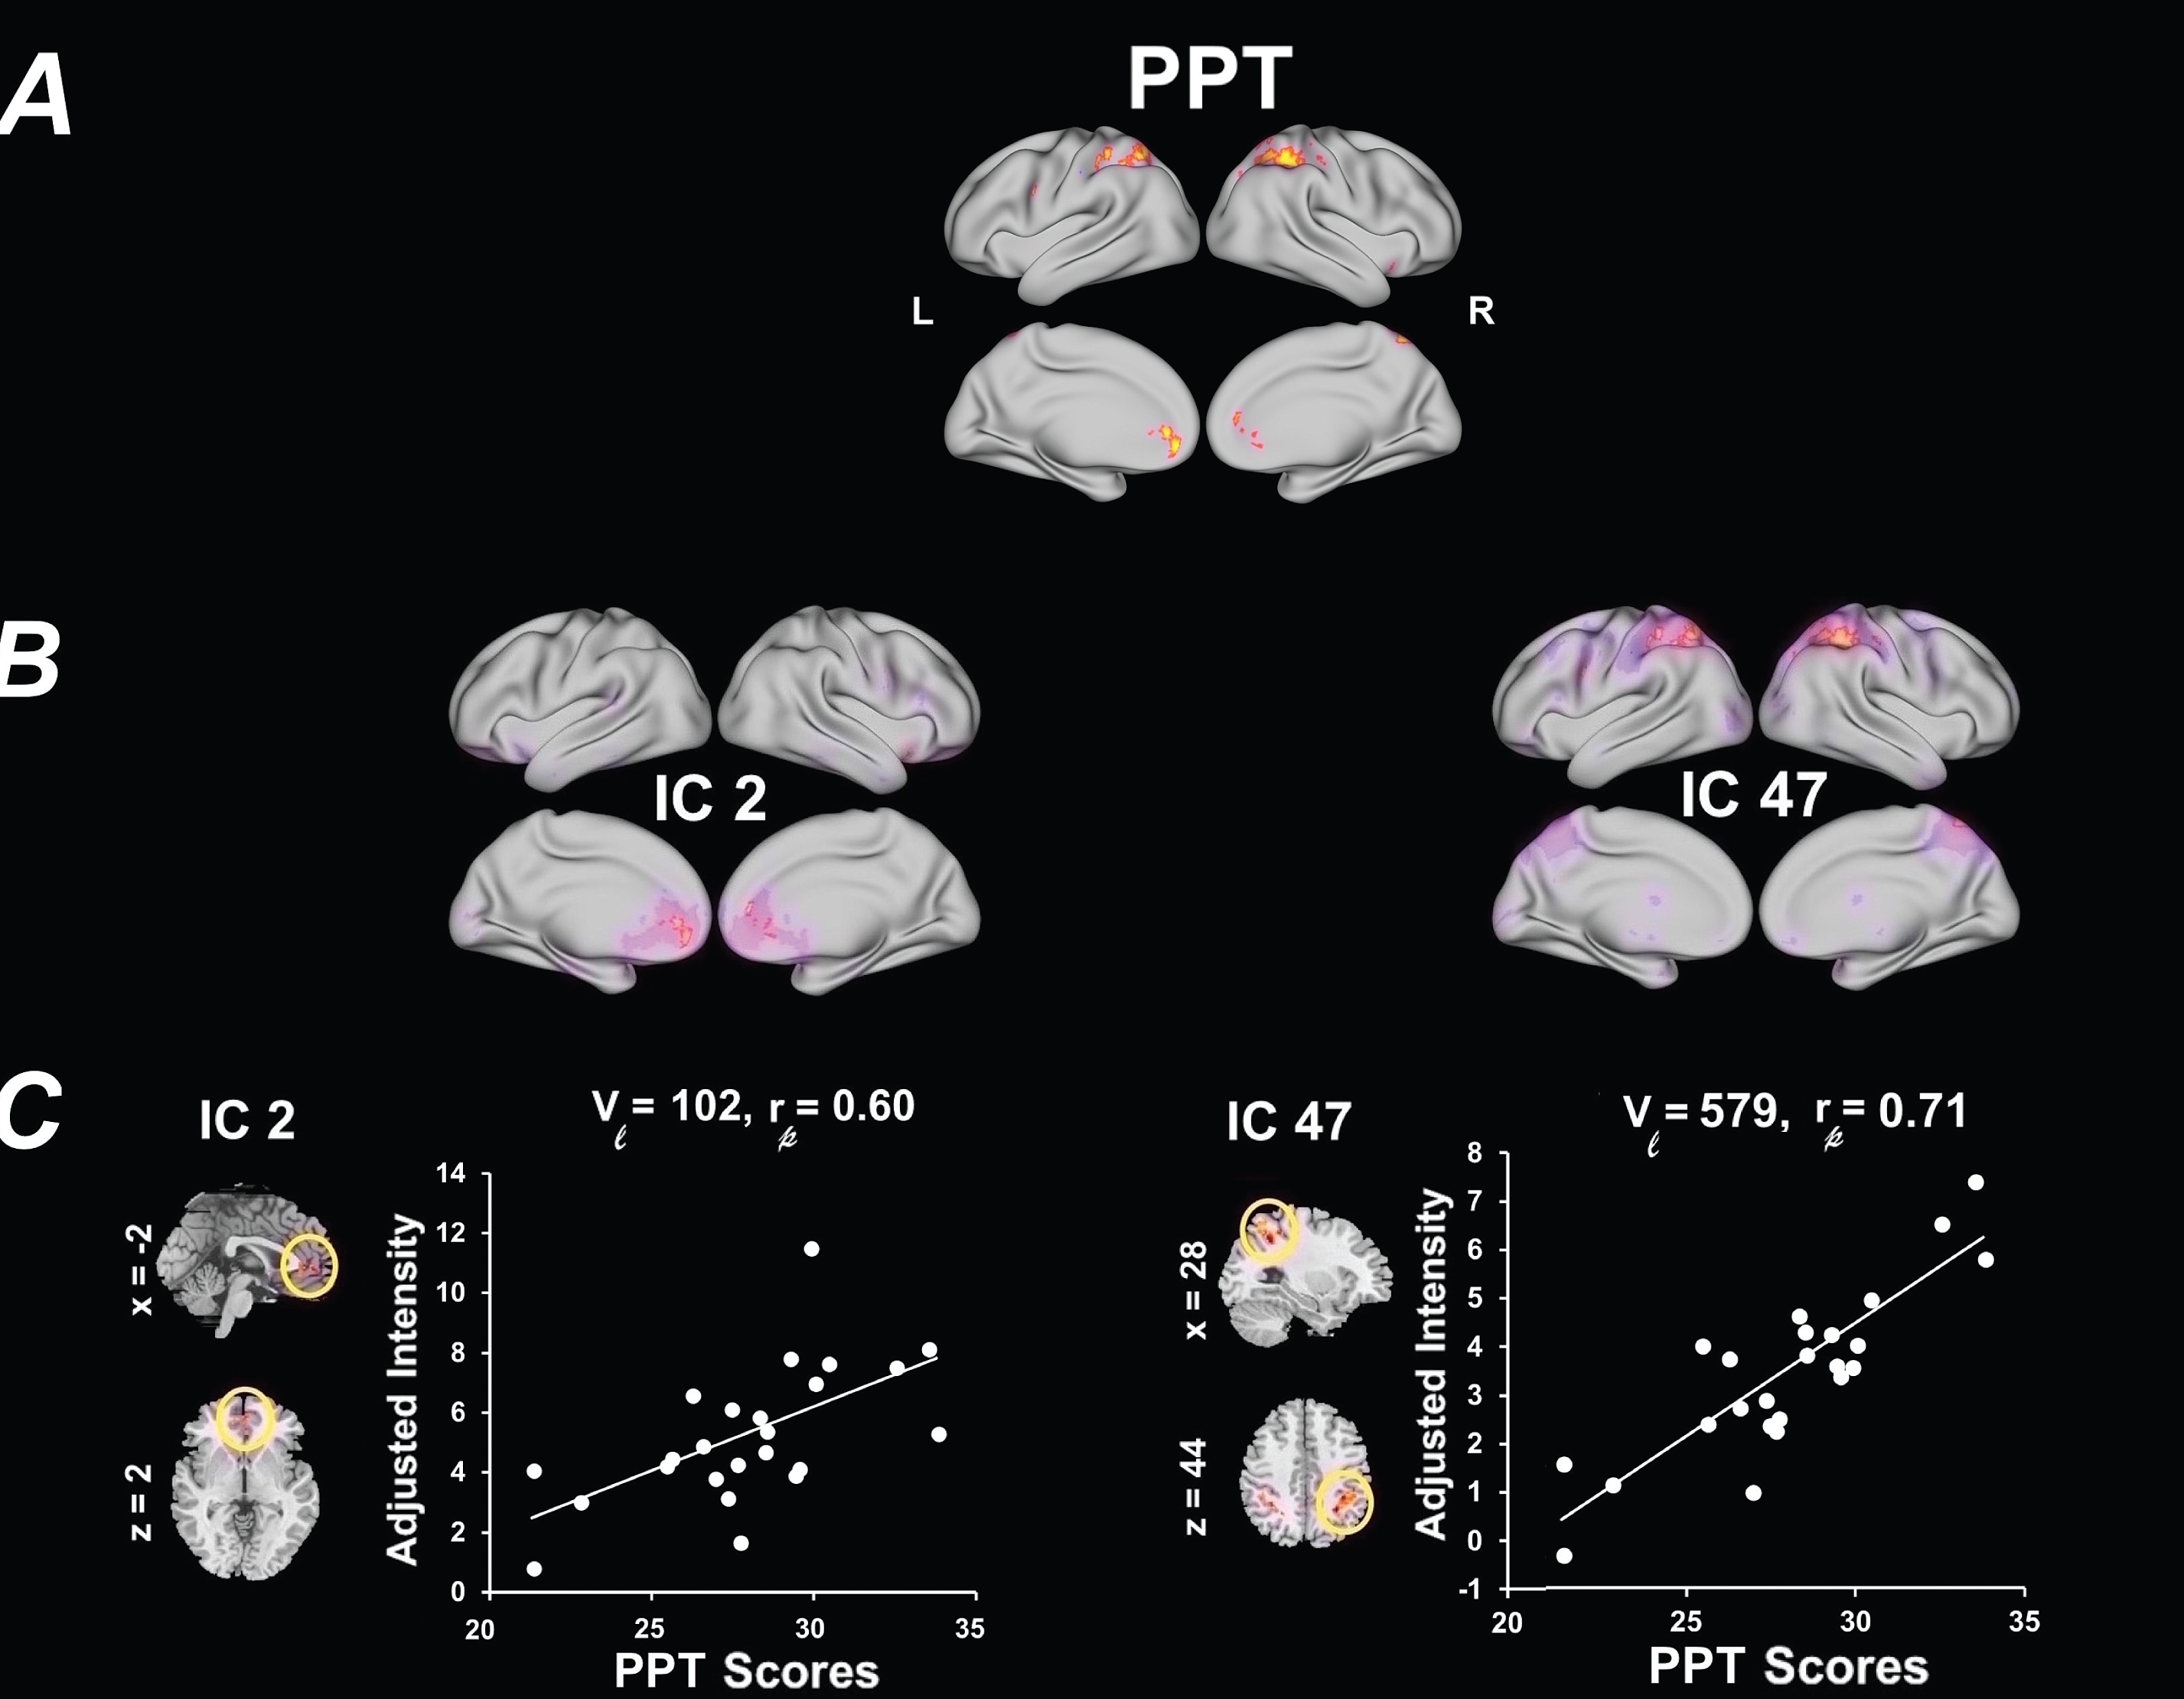 Univariate results summarizing the effects of PPT on RSN spatial map intensities. (A) 3D brain map depicting the composite renderings of significant effects of PPT over all RSNs are displayed as the –sign(t)log10(p) (p < 0.05, uncorrected). (B) Significant effects of PPT are shown in individual RSNs overlaid on their corresponding RSN template (purple) and displayed as the –sign(t)log10(p) (p < 0.05, uncorrected). (C) Scatter plots show the PPT effects for the largest significant cluster in each affected RSN (indicated by yellow or blue circles on the RSN maps shown in representative orthogonal slices with corresponding MNI coordinates) with the number of contributing voxels (Vl), and the partial correlation coefficient (rp). See Table 3 for the associated statistics, anatomical extent, the t-value of the maxima, and corresponding MNI coordinates for the largest significant clusters. PPT, Physical Performance Test total scores; SMN, sensorimotor networks; SCN, subcortical networks; DMN, default-mode networks; CAN, cognitive and attention networks; L, left; R, right.